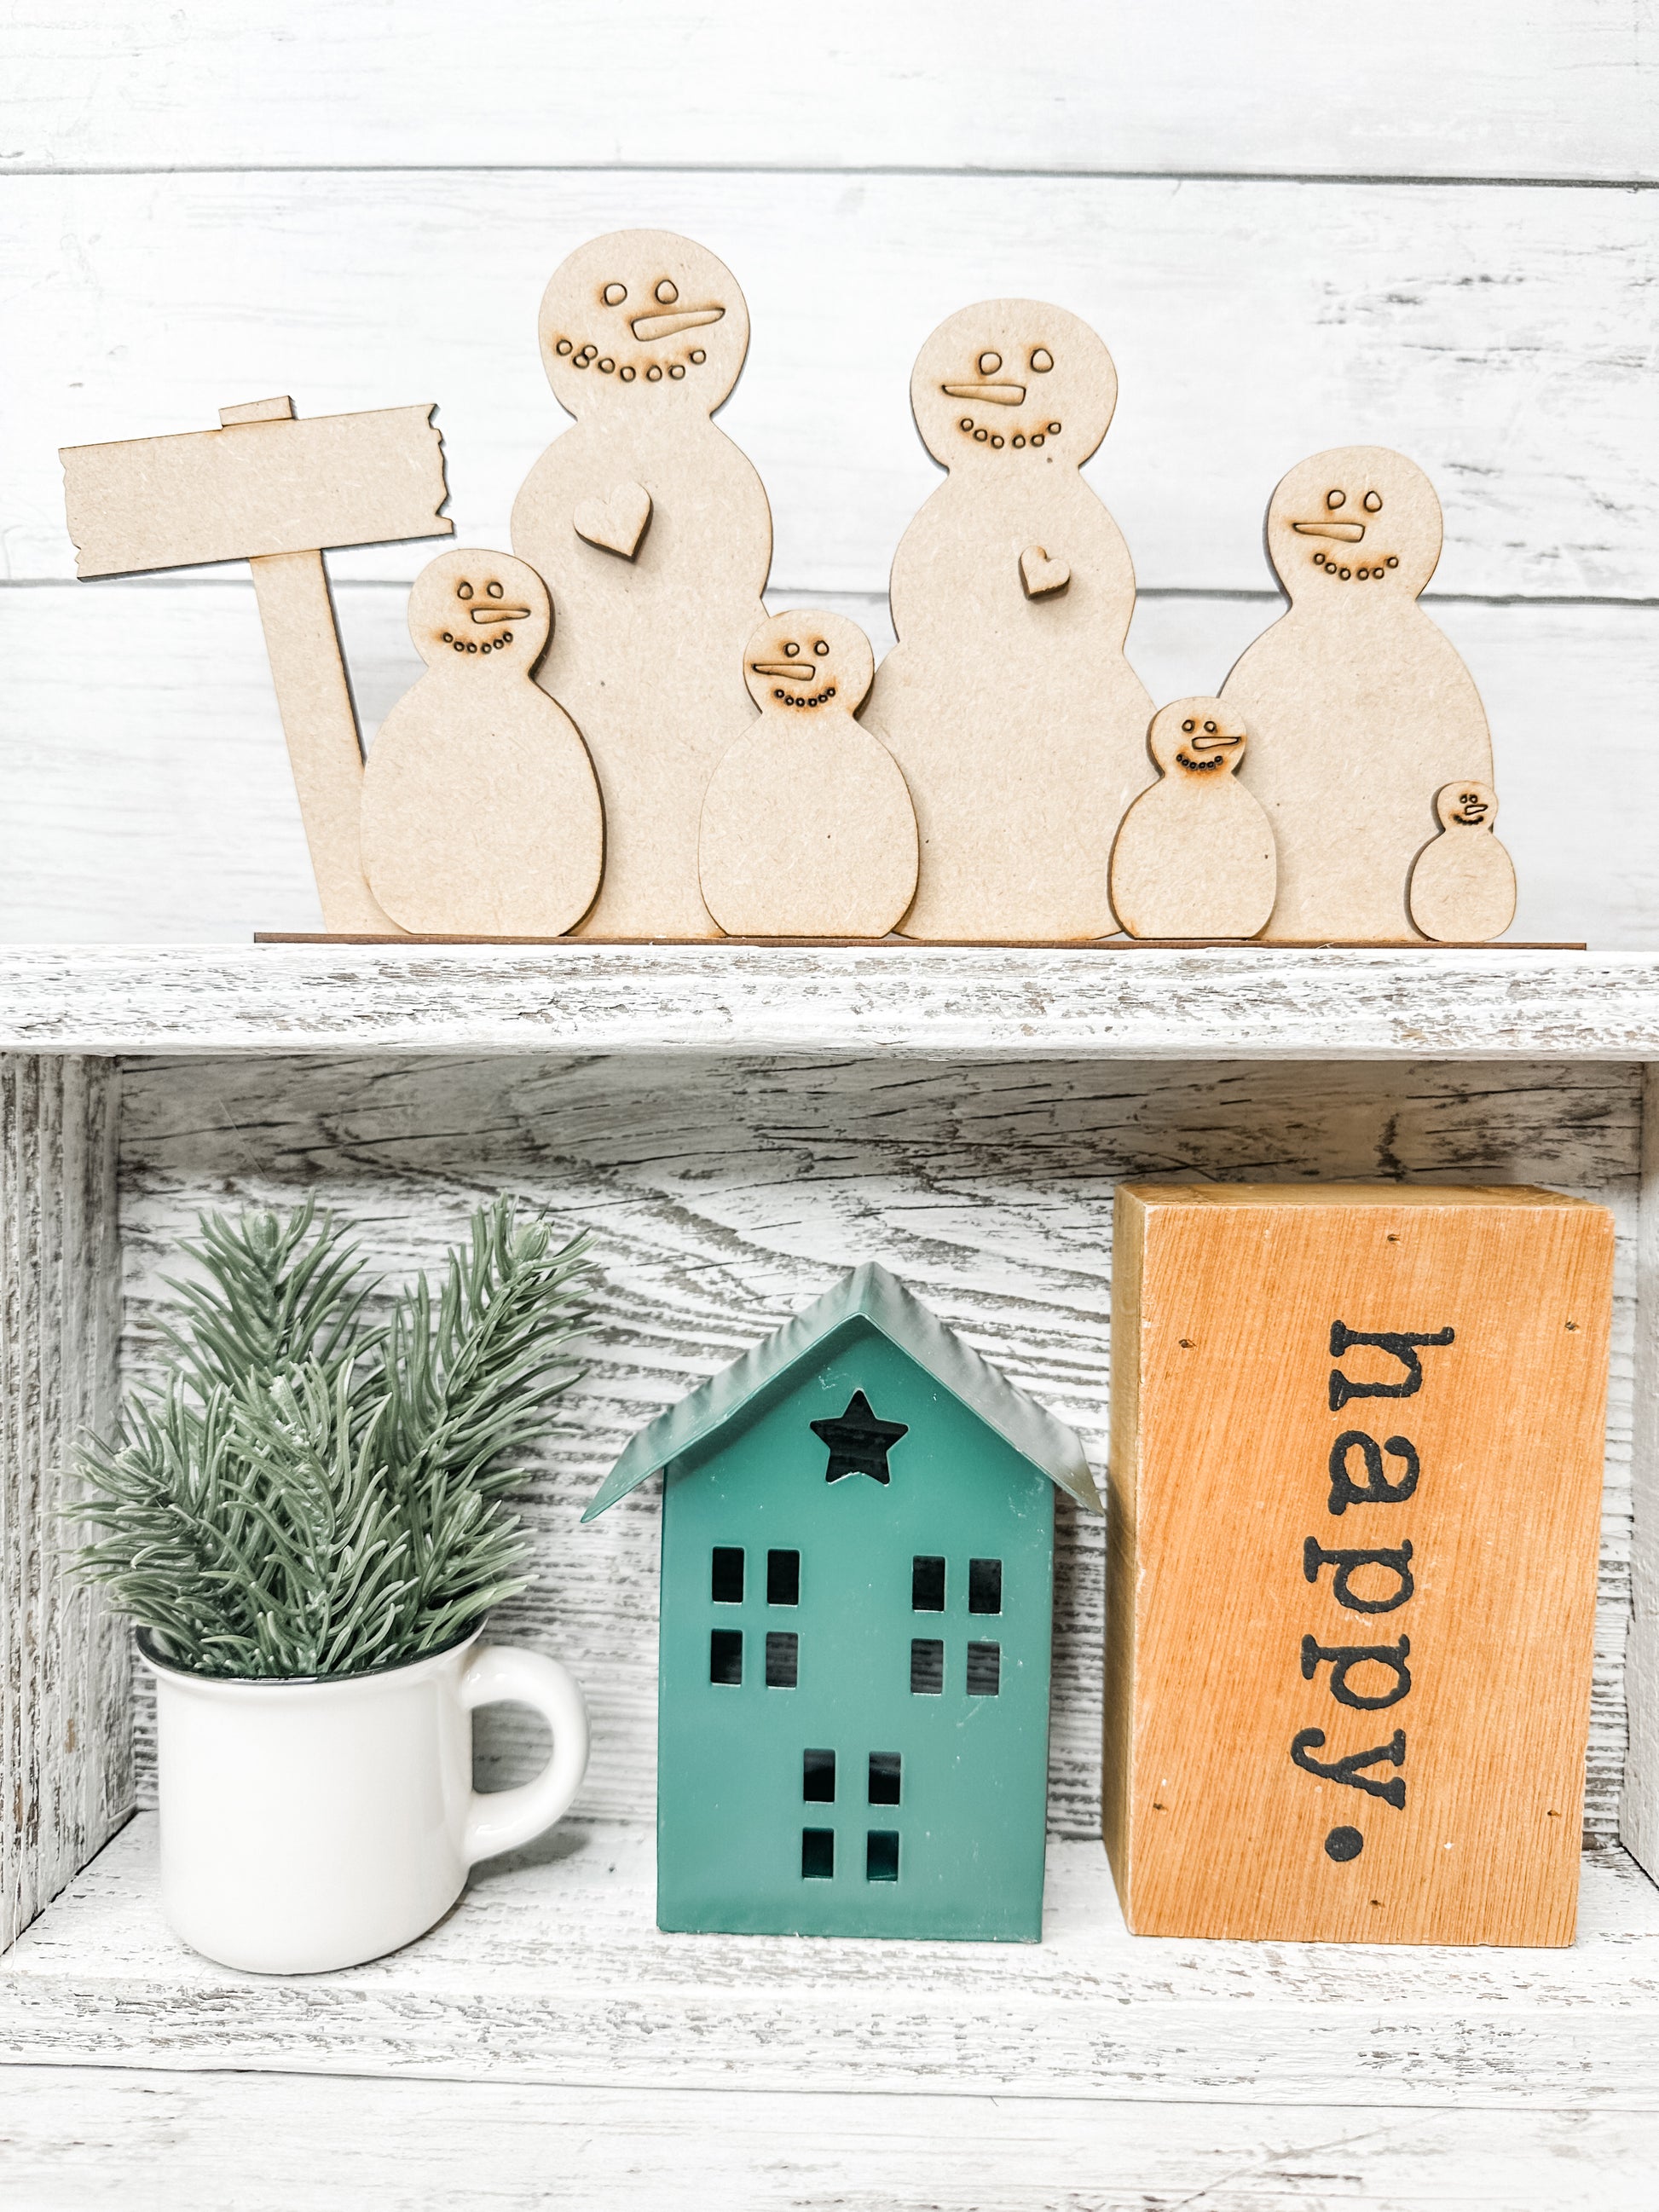 Build-Your-Own Snowman Kit Shelf Sitter, Shaker Sign – The Stamped Cottage